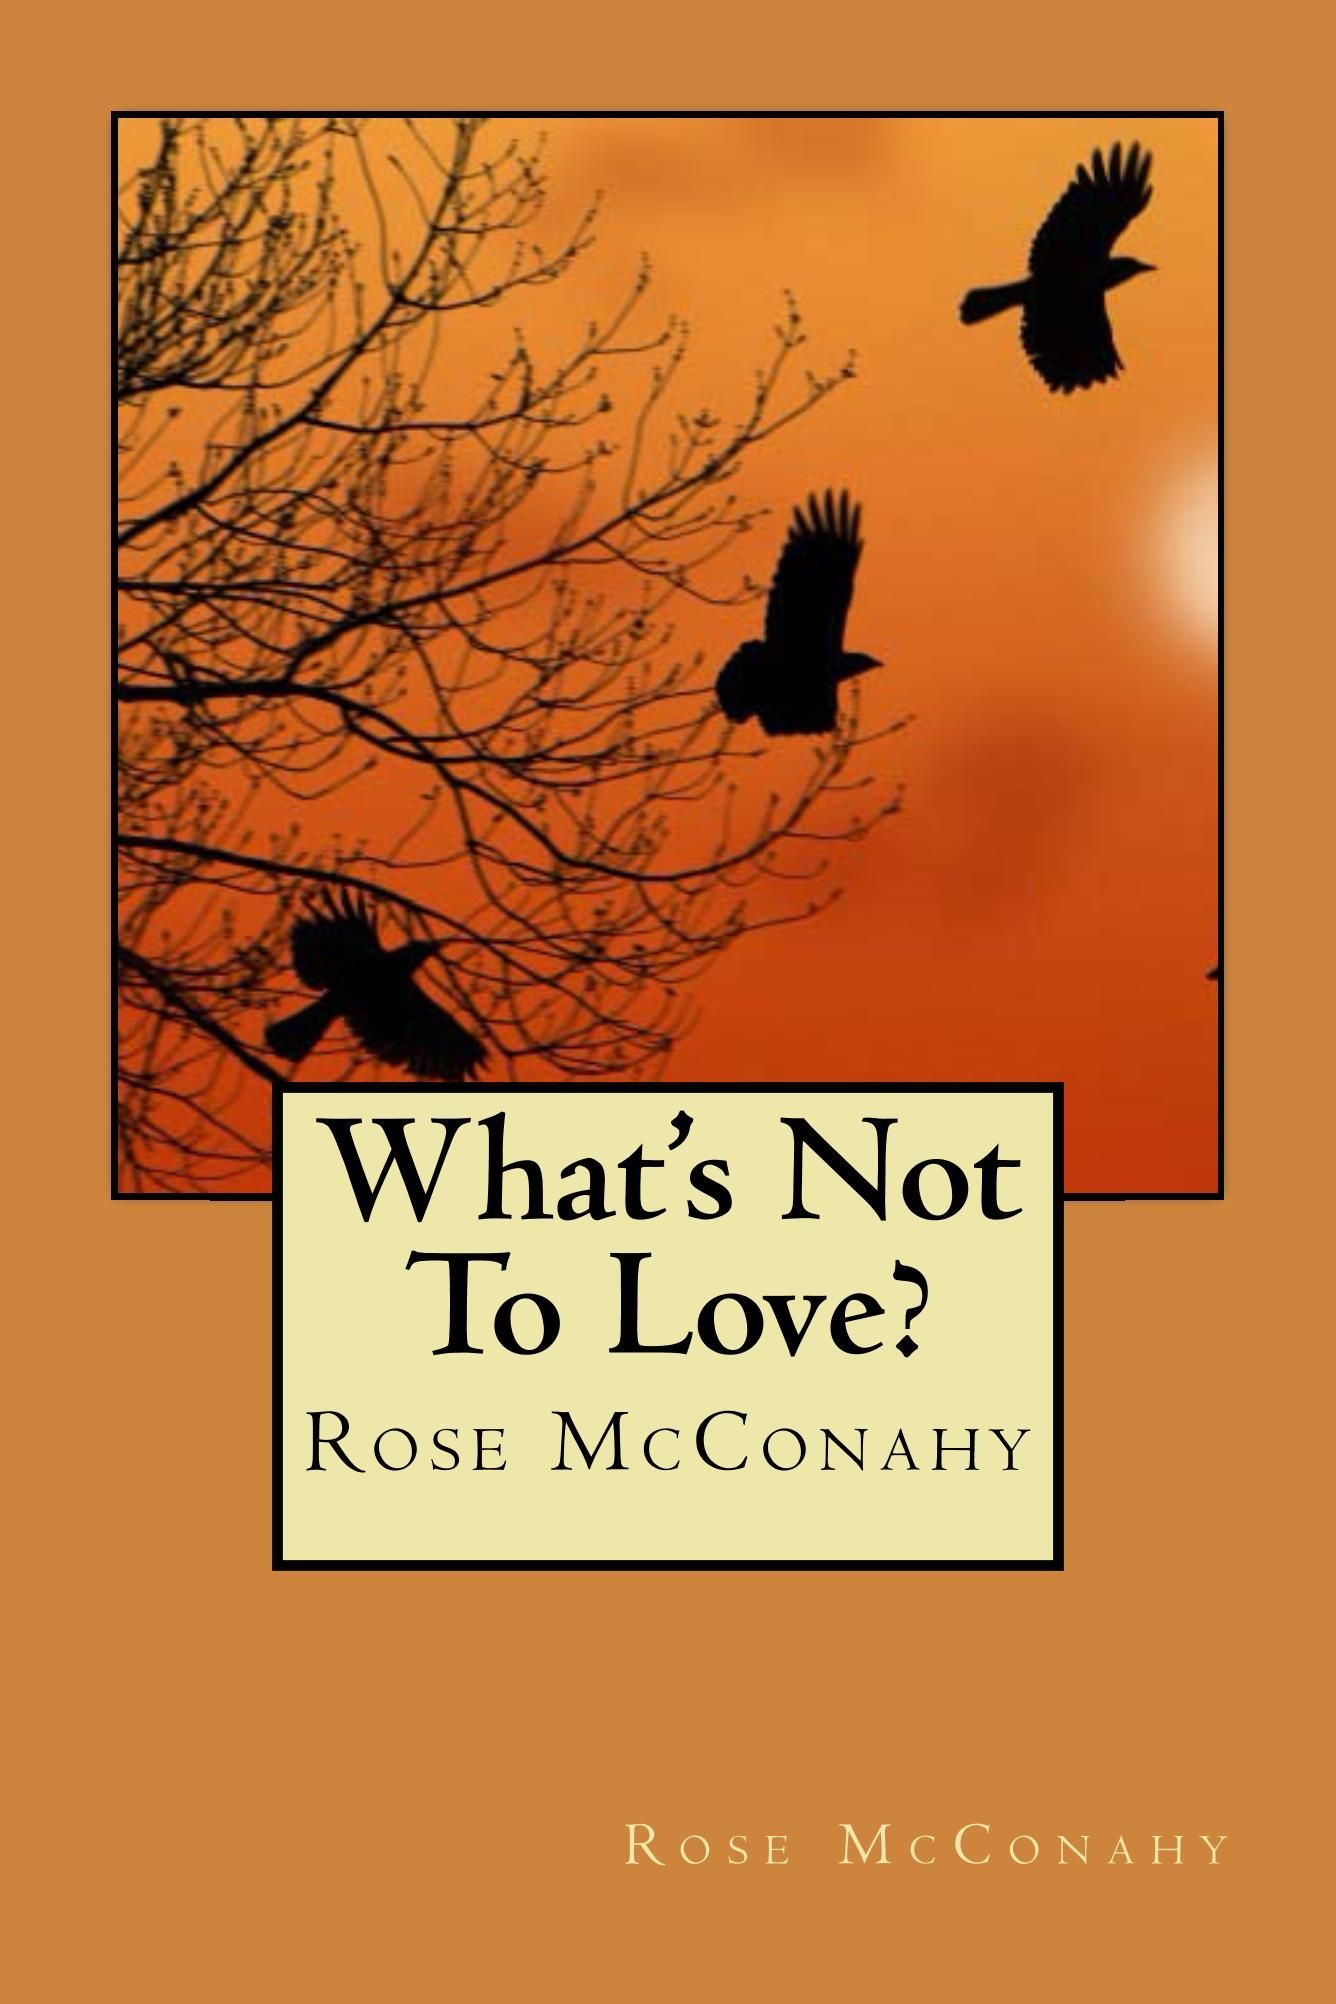 What's Not To Love? by Rose McConahy